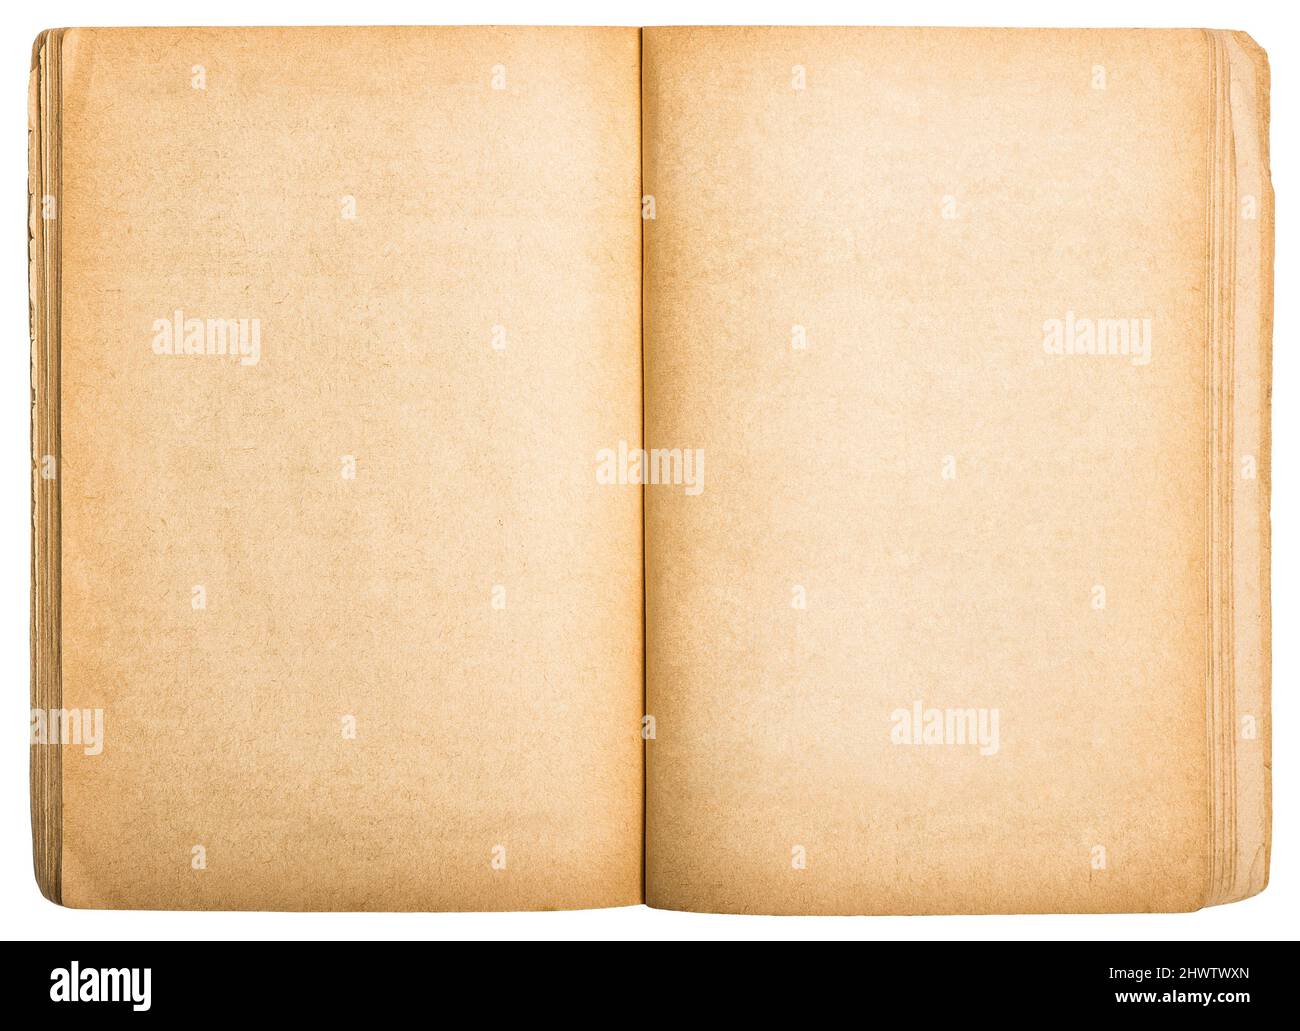 https://c8.alamy.com/comp/2HWTWXN/open-old-book-used-paper-isolated-on-white-background-2HWTWXN.jpg